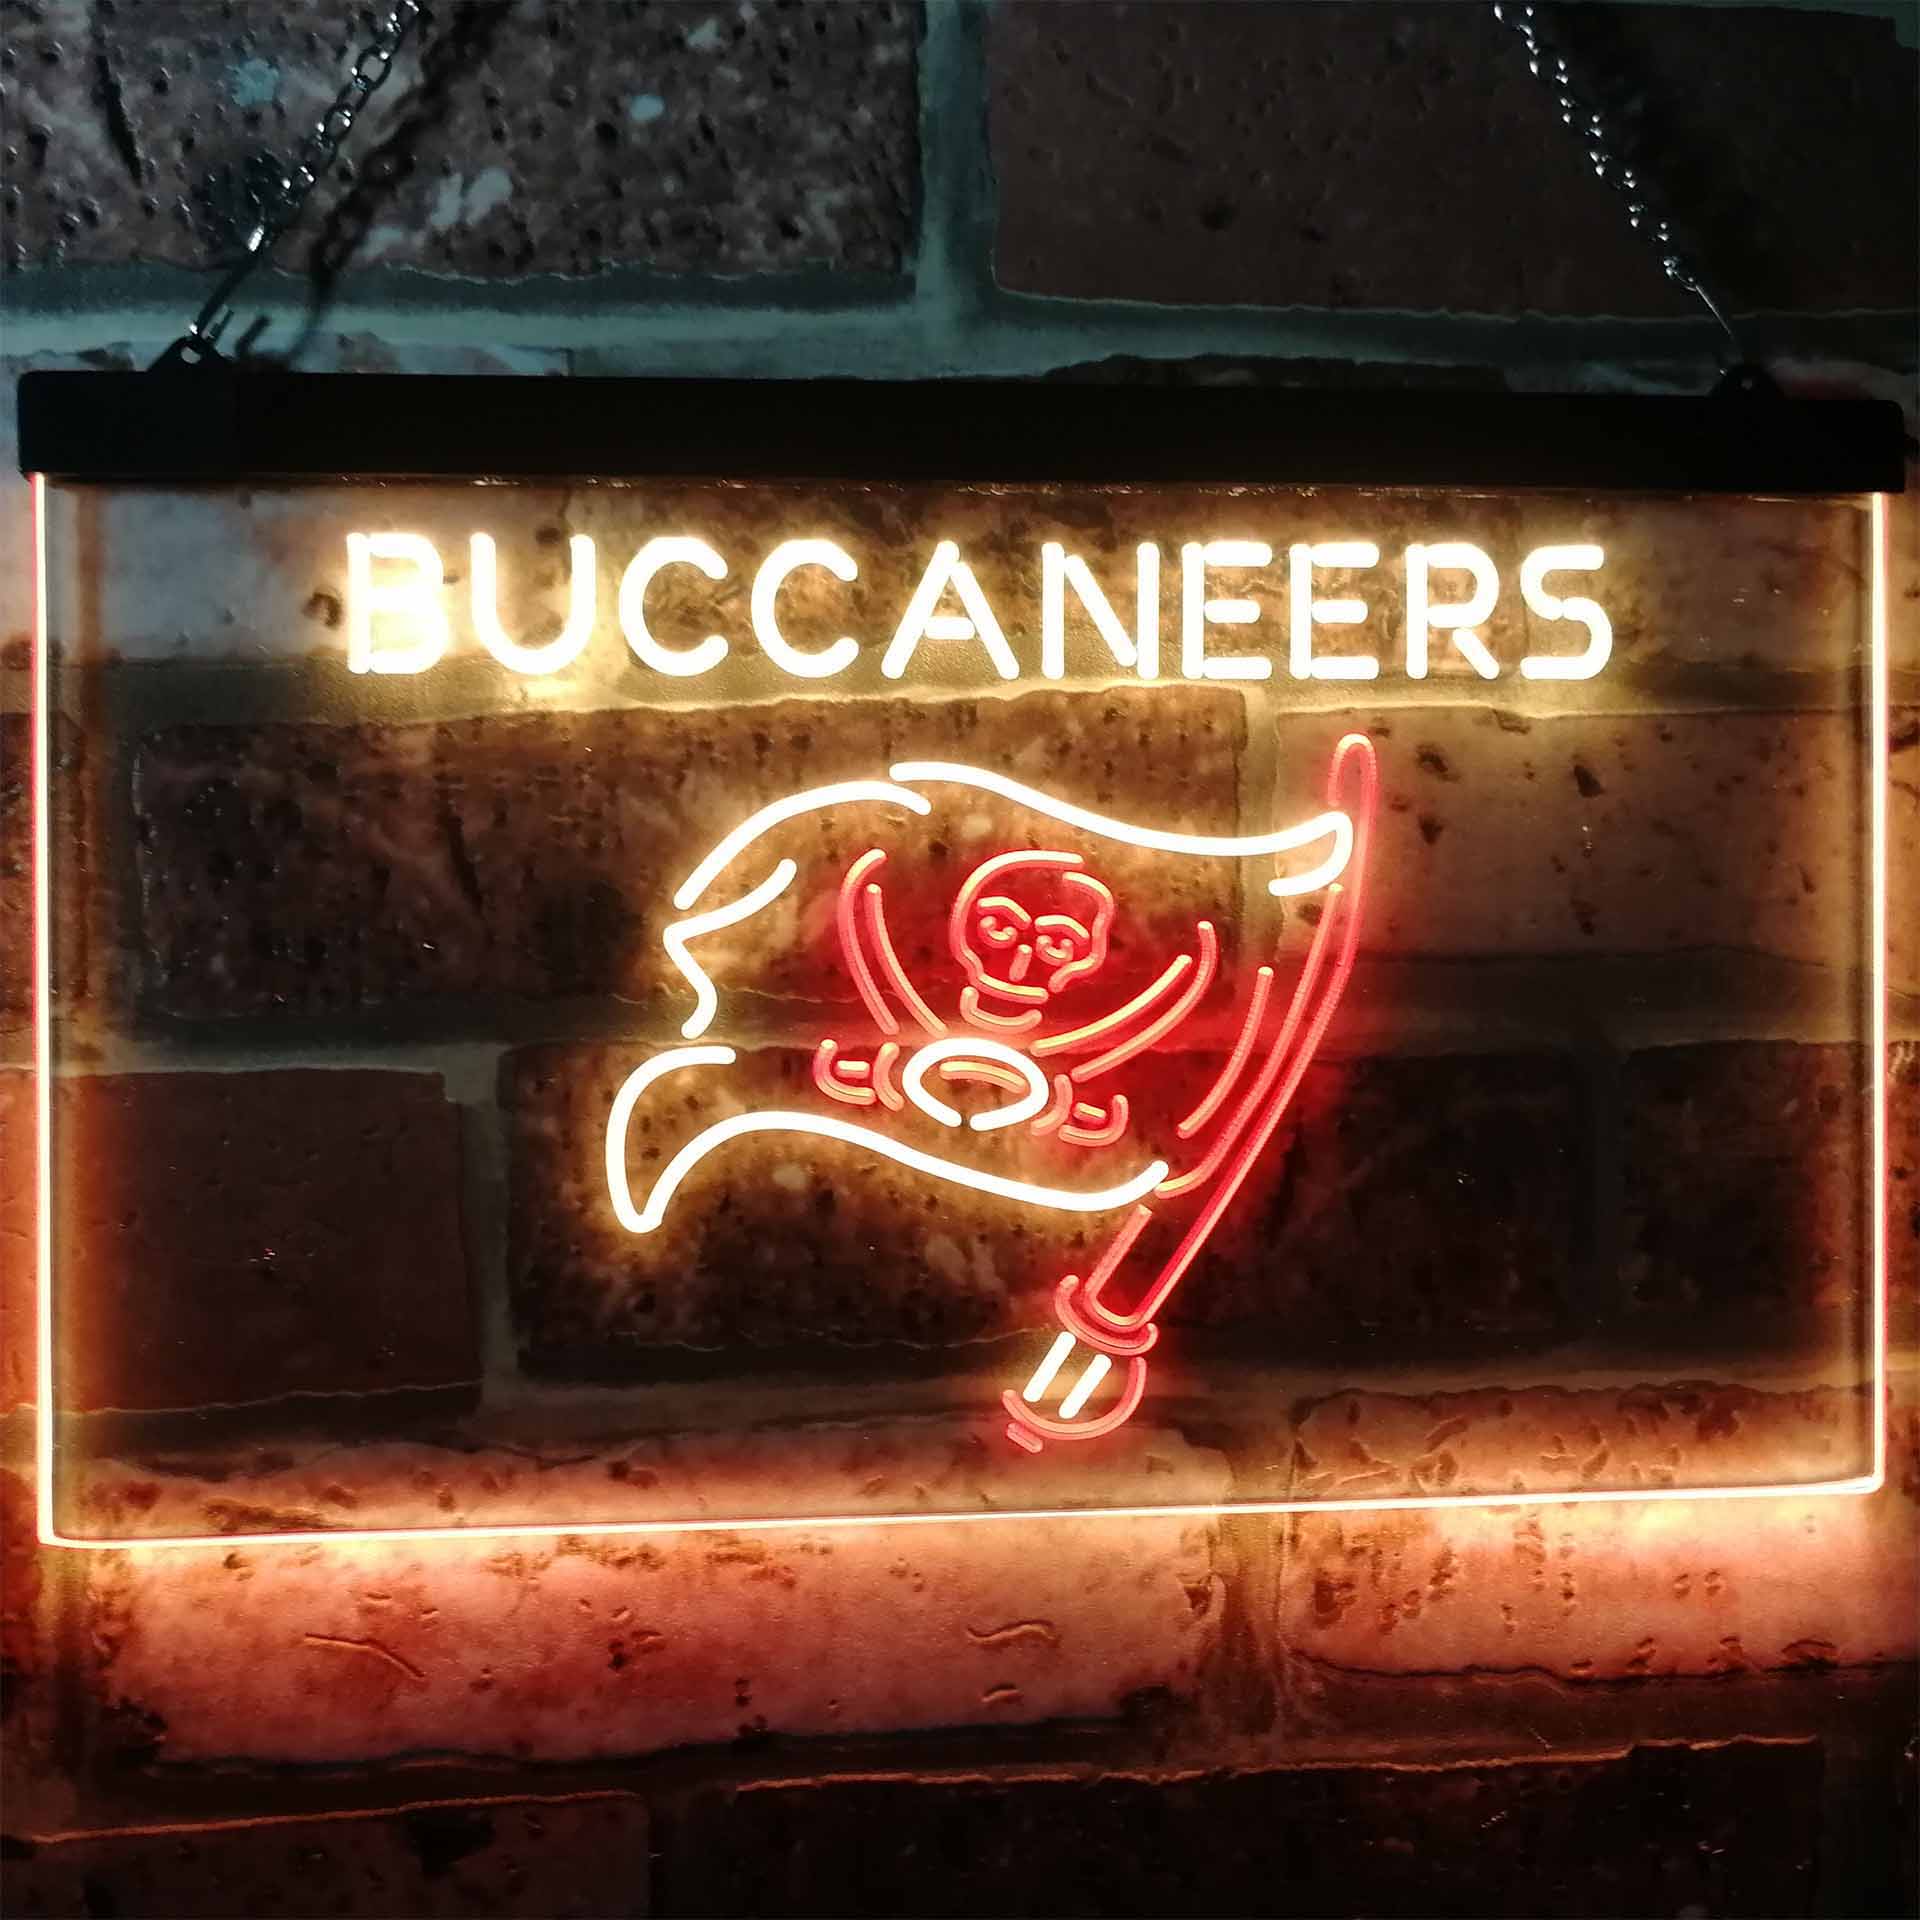 Tampa Bay Buccaneers Decor LED Neon Sign